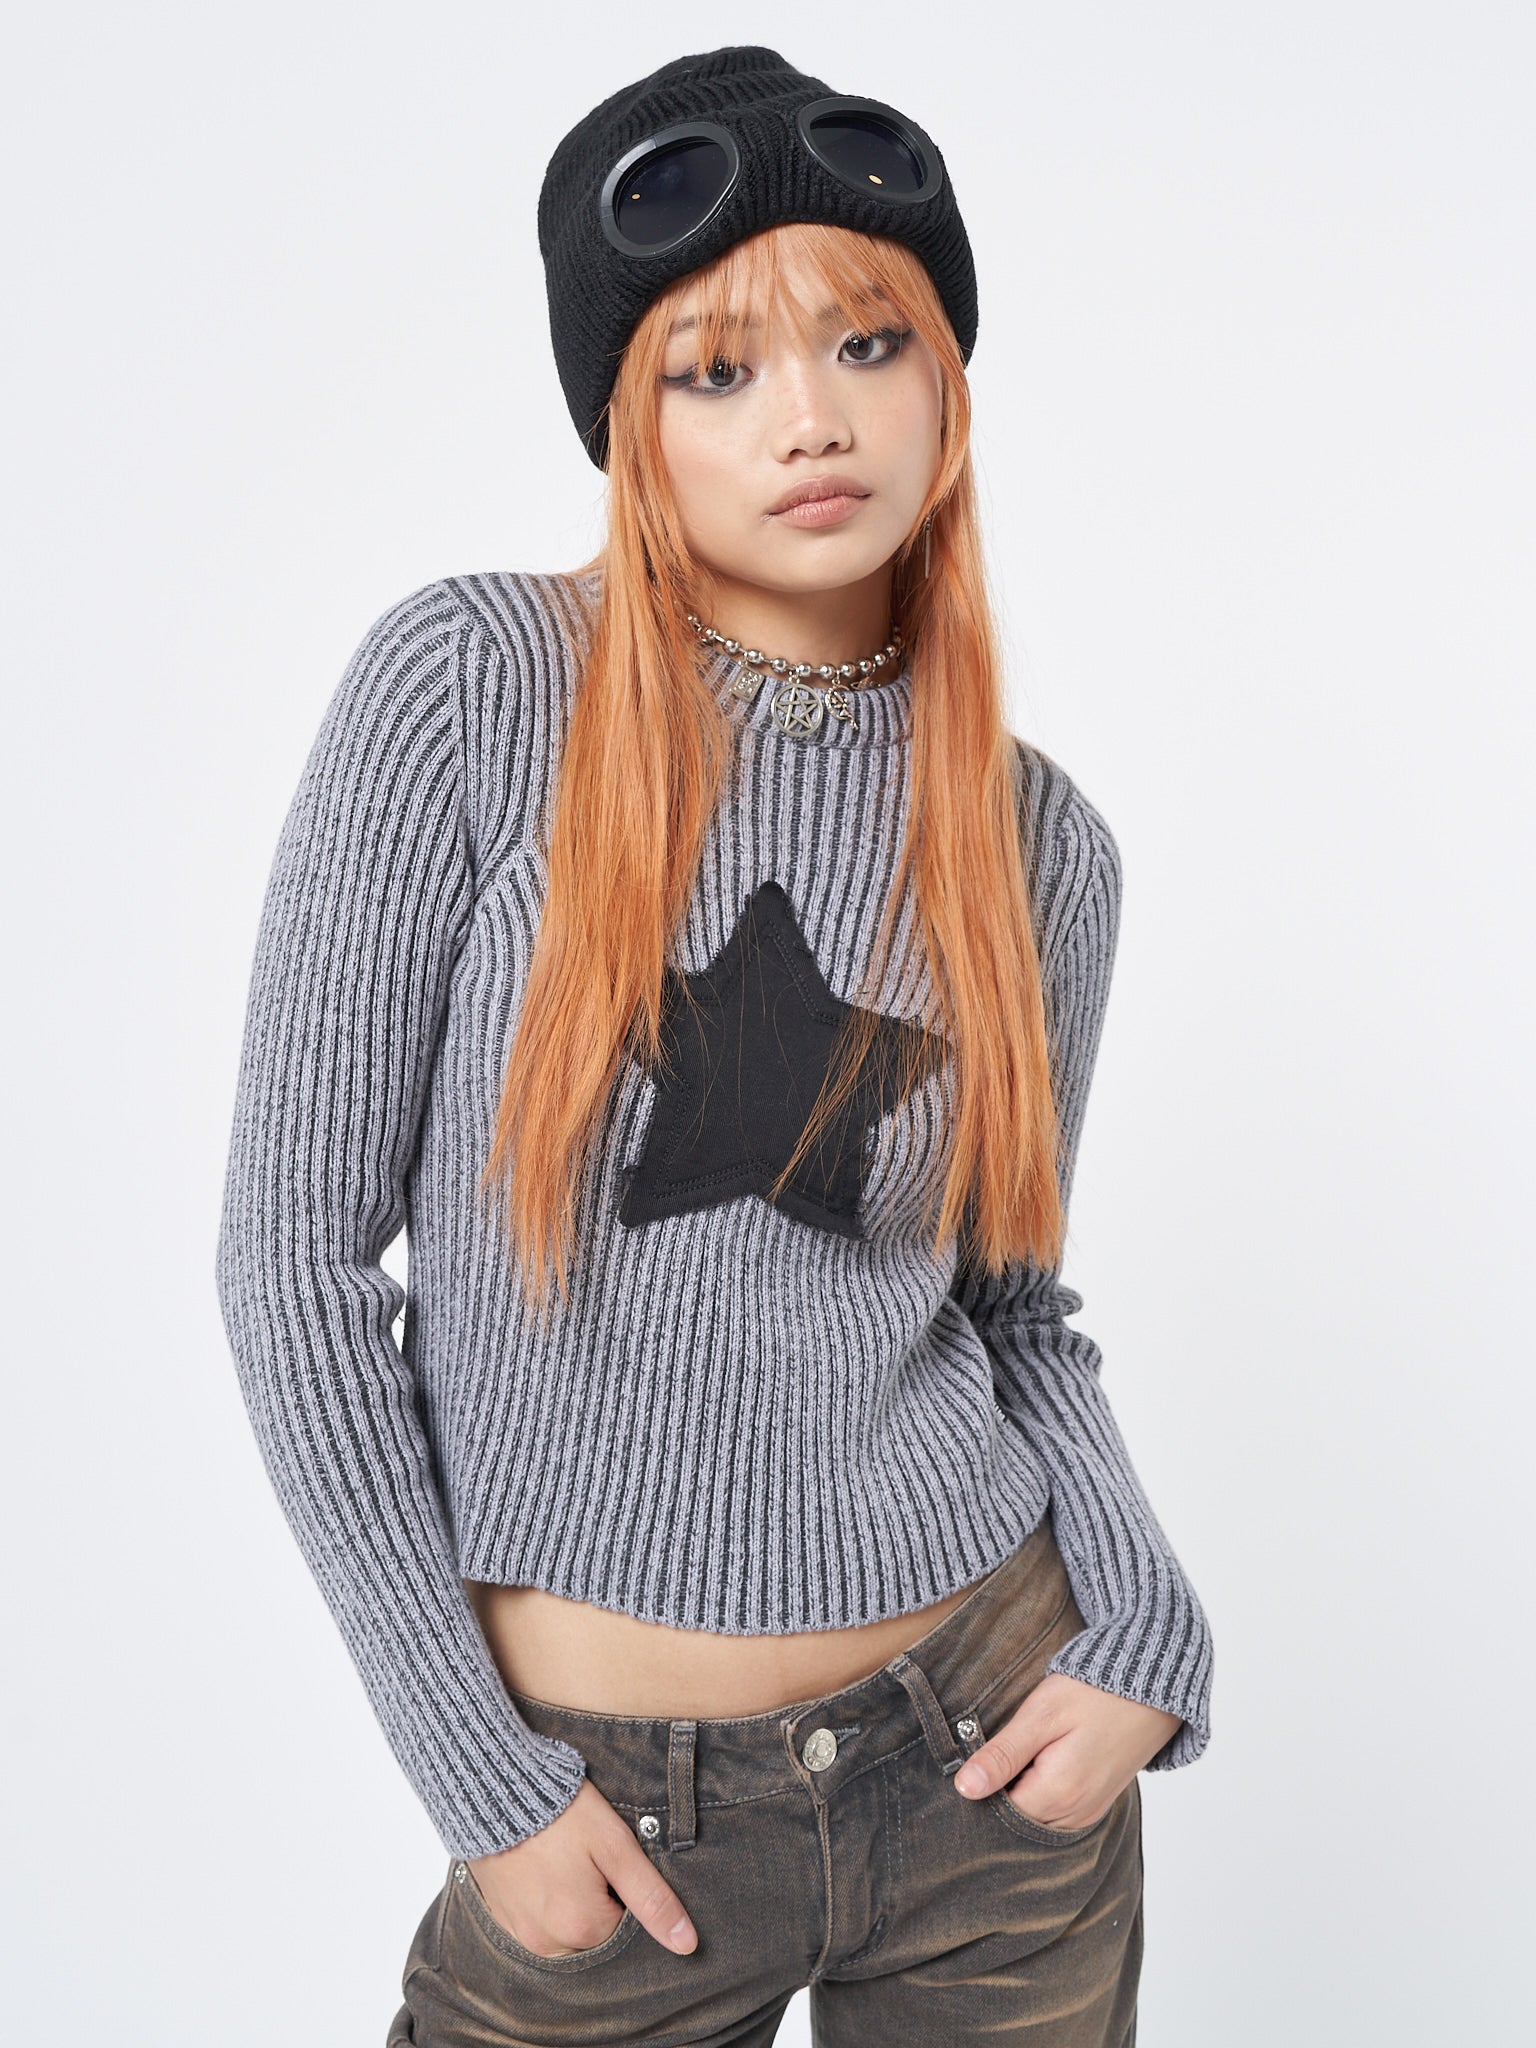 Chunky knit jumper in grey with front star patch in black